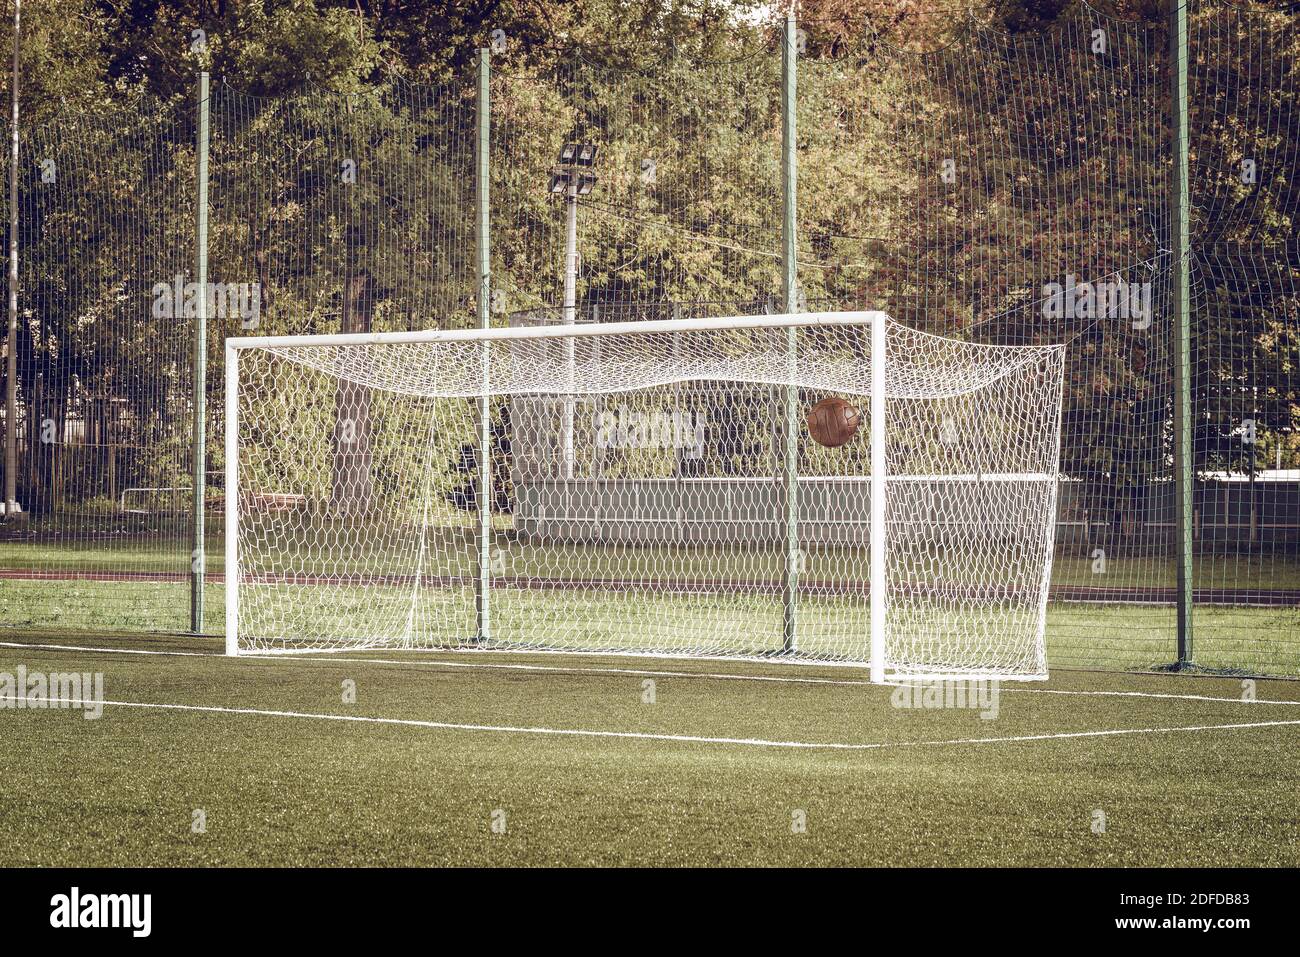 View of the football gate and ball inside it by soccer the field Stock Photo